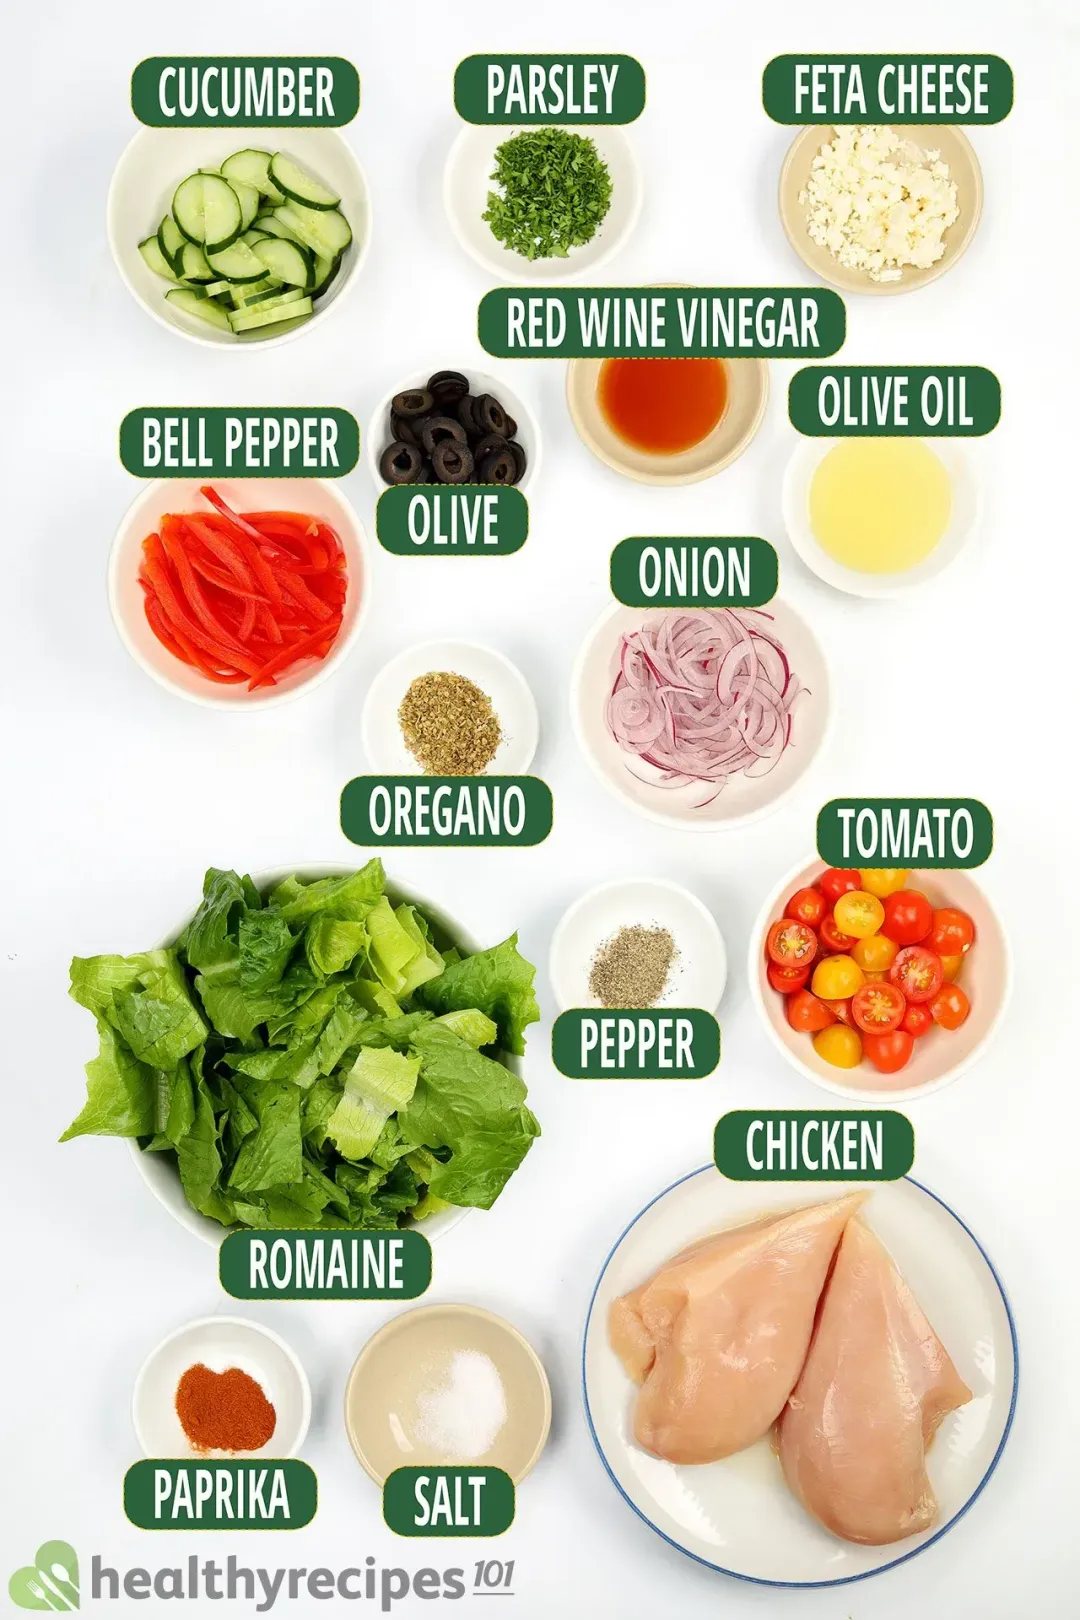 Ingredients for Greek Chicken Salad, including uncooked chicken breasts, leafy greens, cherry tomatoes, and other ingredients.